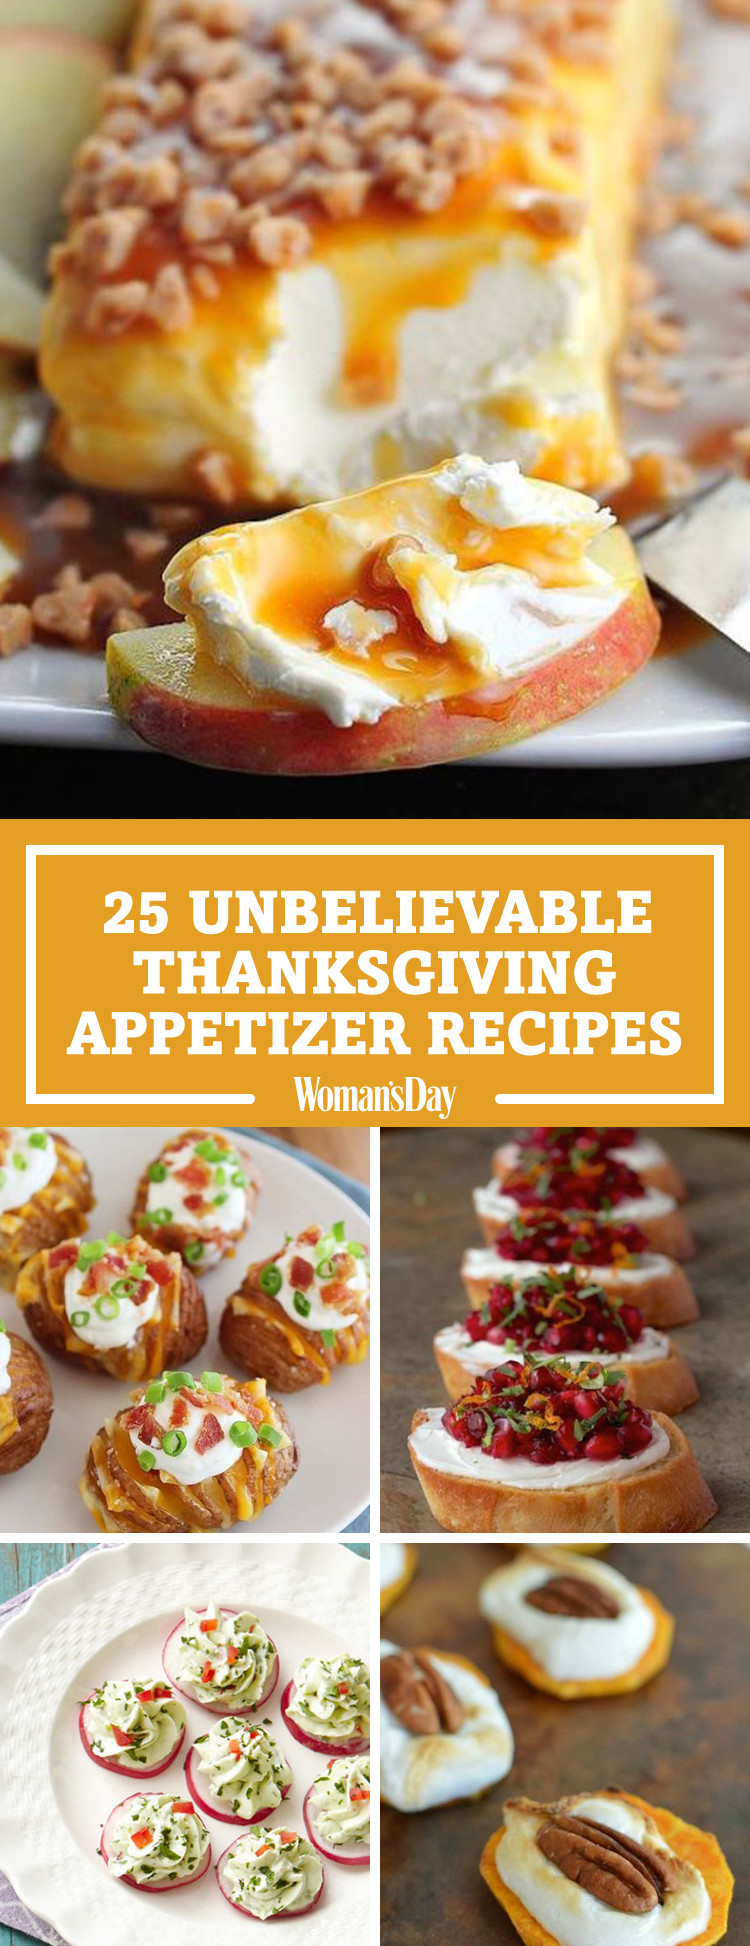 Easy Thanksgiving Appetizers
 34 Easy Thanksgiving Appetizers Best Recipes for